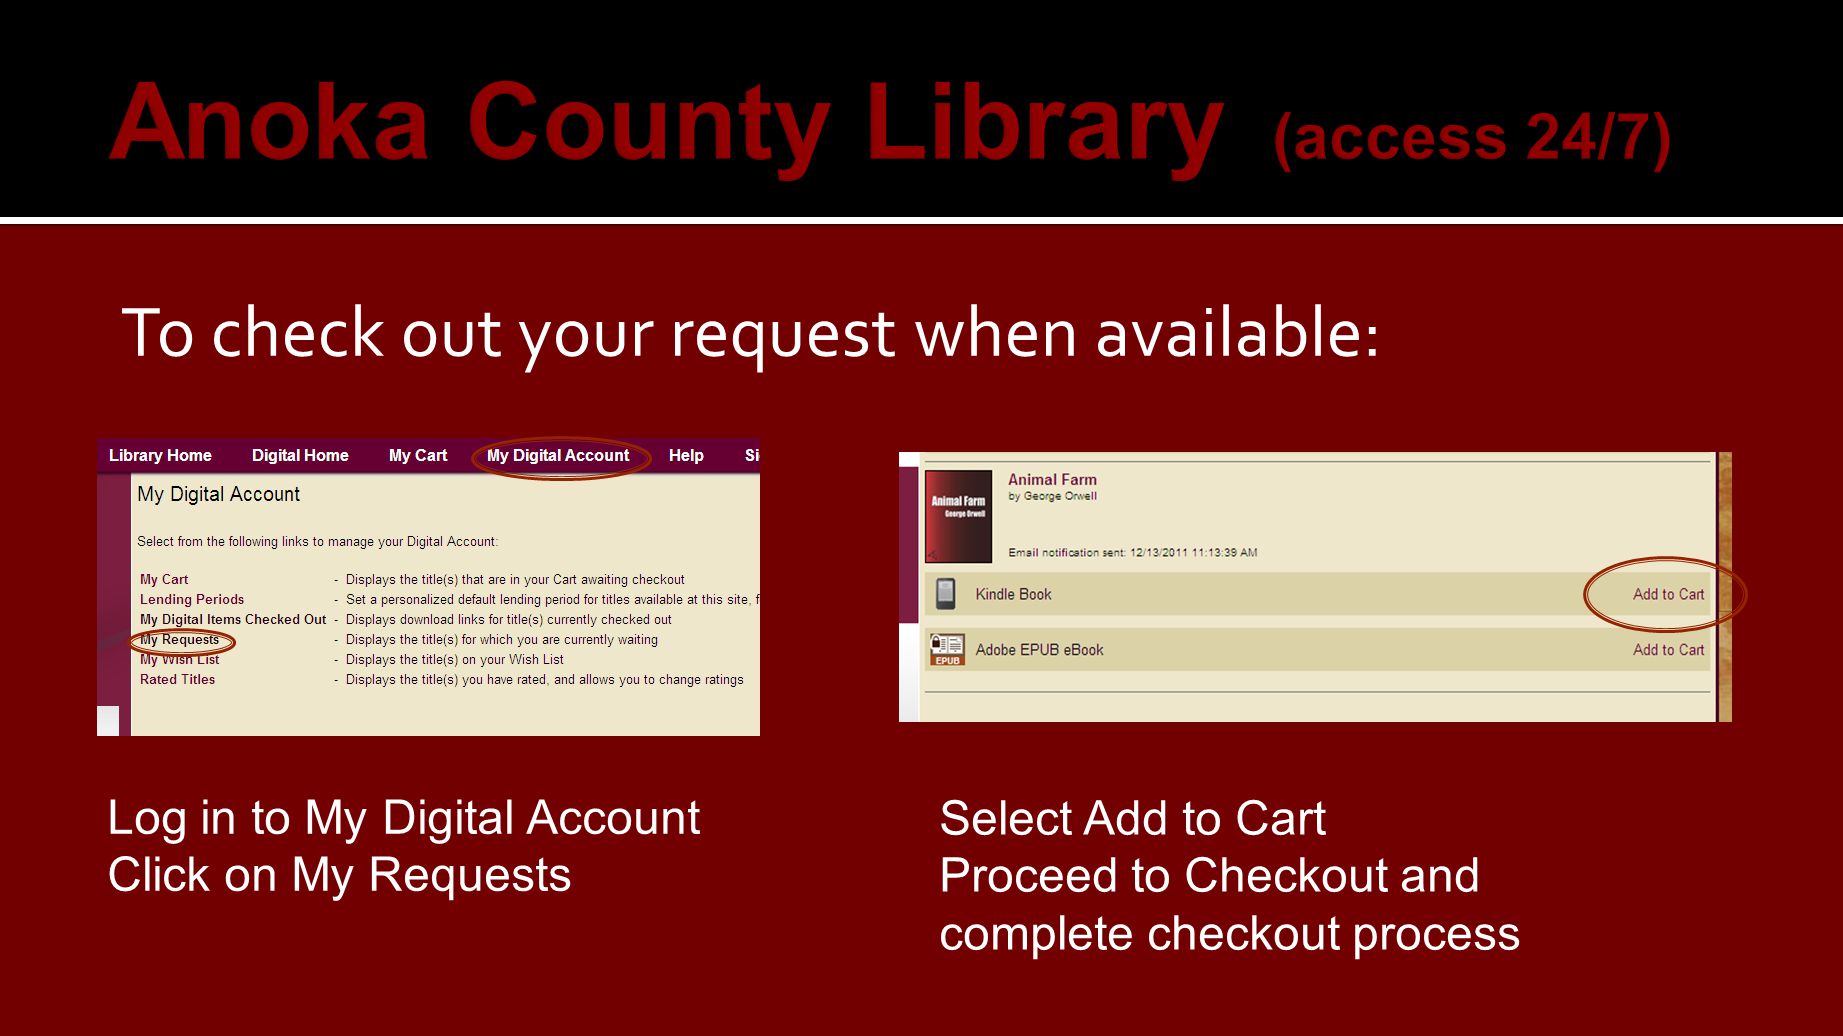 Anoka County Library (access 24/7) To check out your request when available: Log in to My Digital Account Click on My Requests Select Add to Cart Proceed to Checkout and complete checkout process